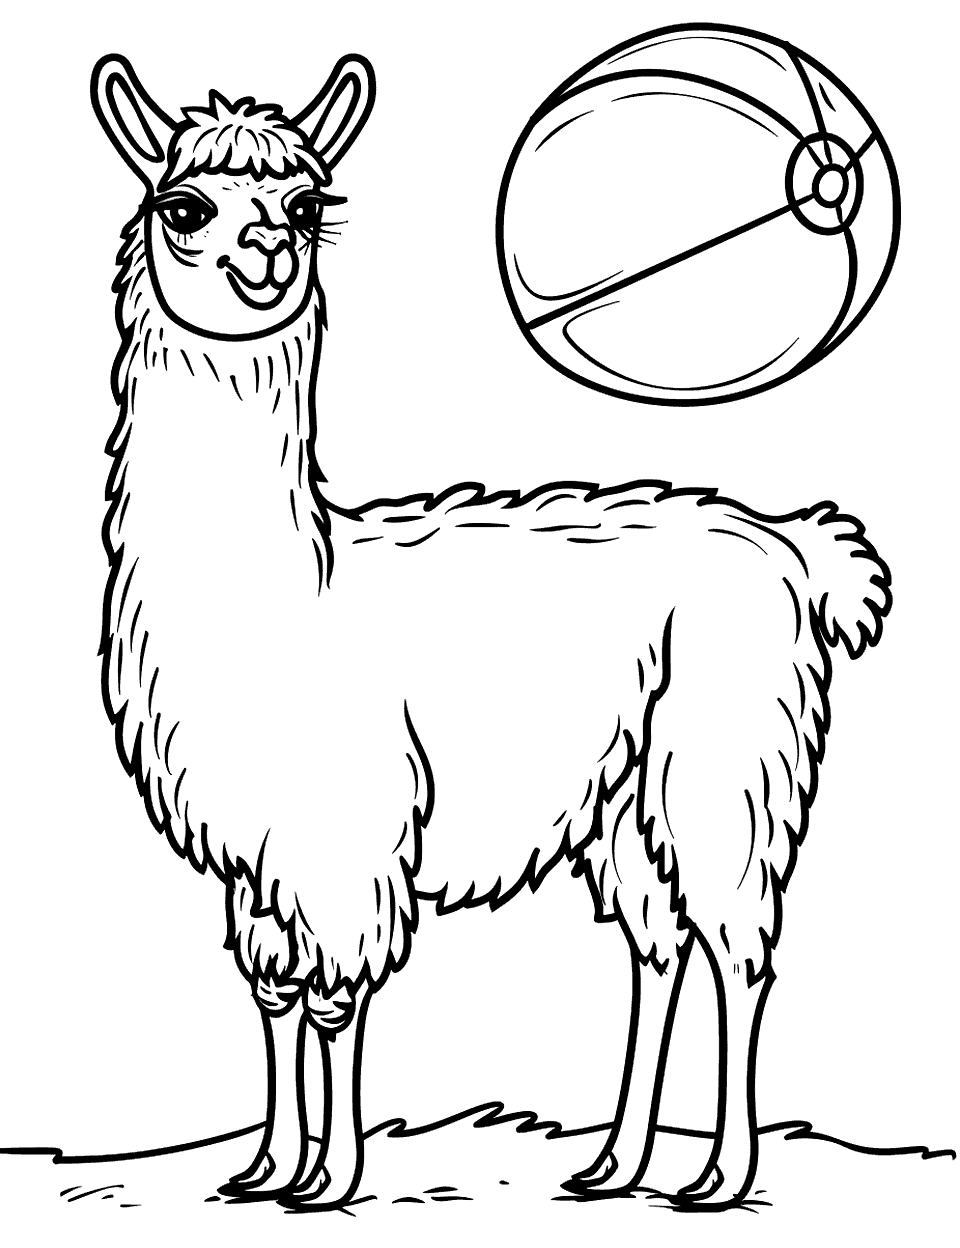 Llama and a Beach Ball Coloring Page - A llama playing at the beach with a large beach ball.